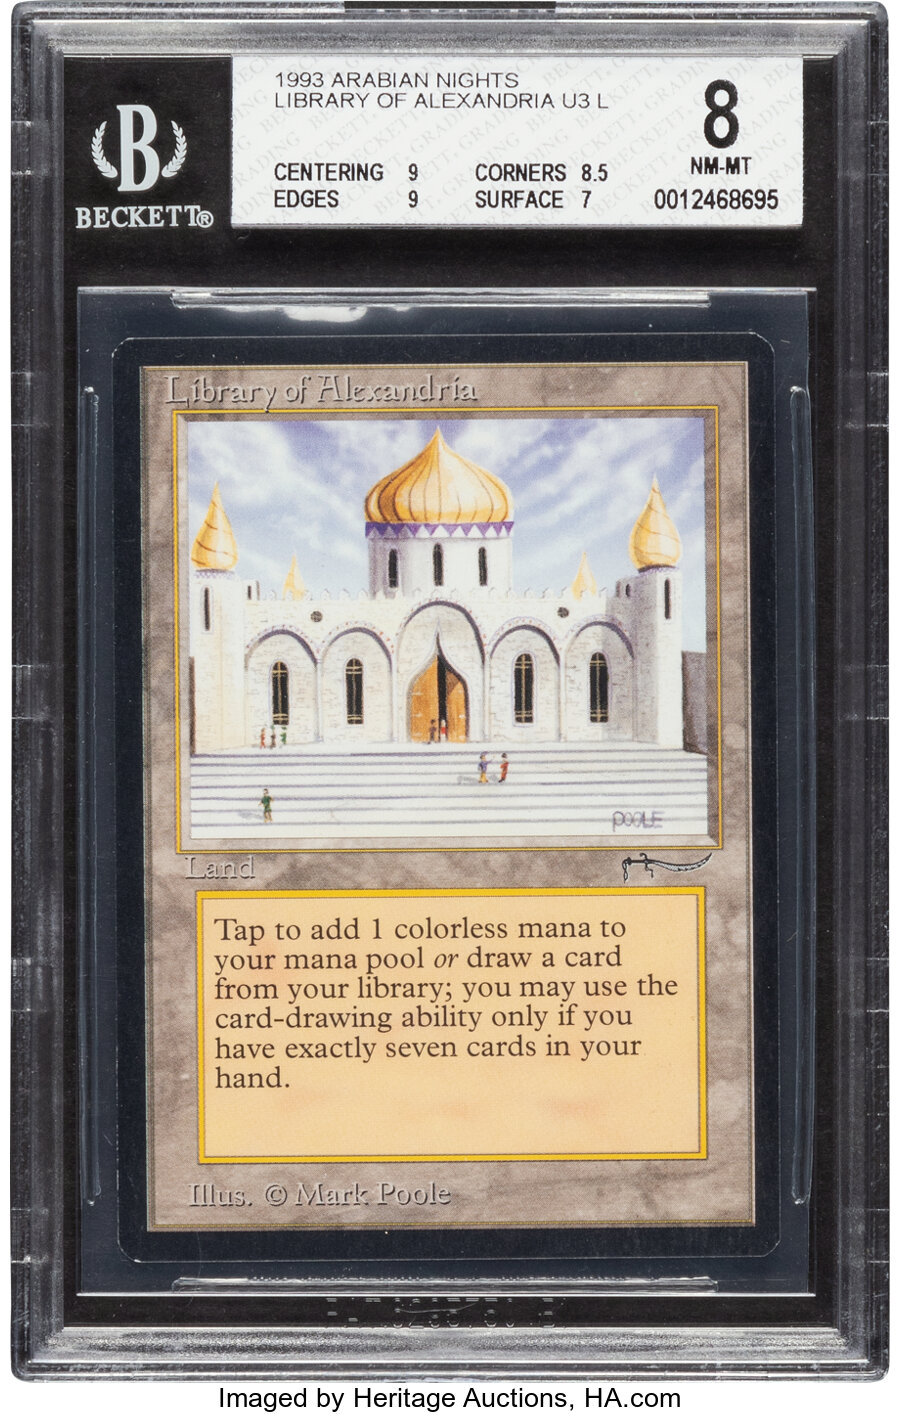 Magic: The Gathering Library of Alexandria Arabian Nights Edition BGS 8 (Wizards of the Coast, 1993)